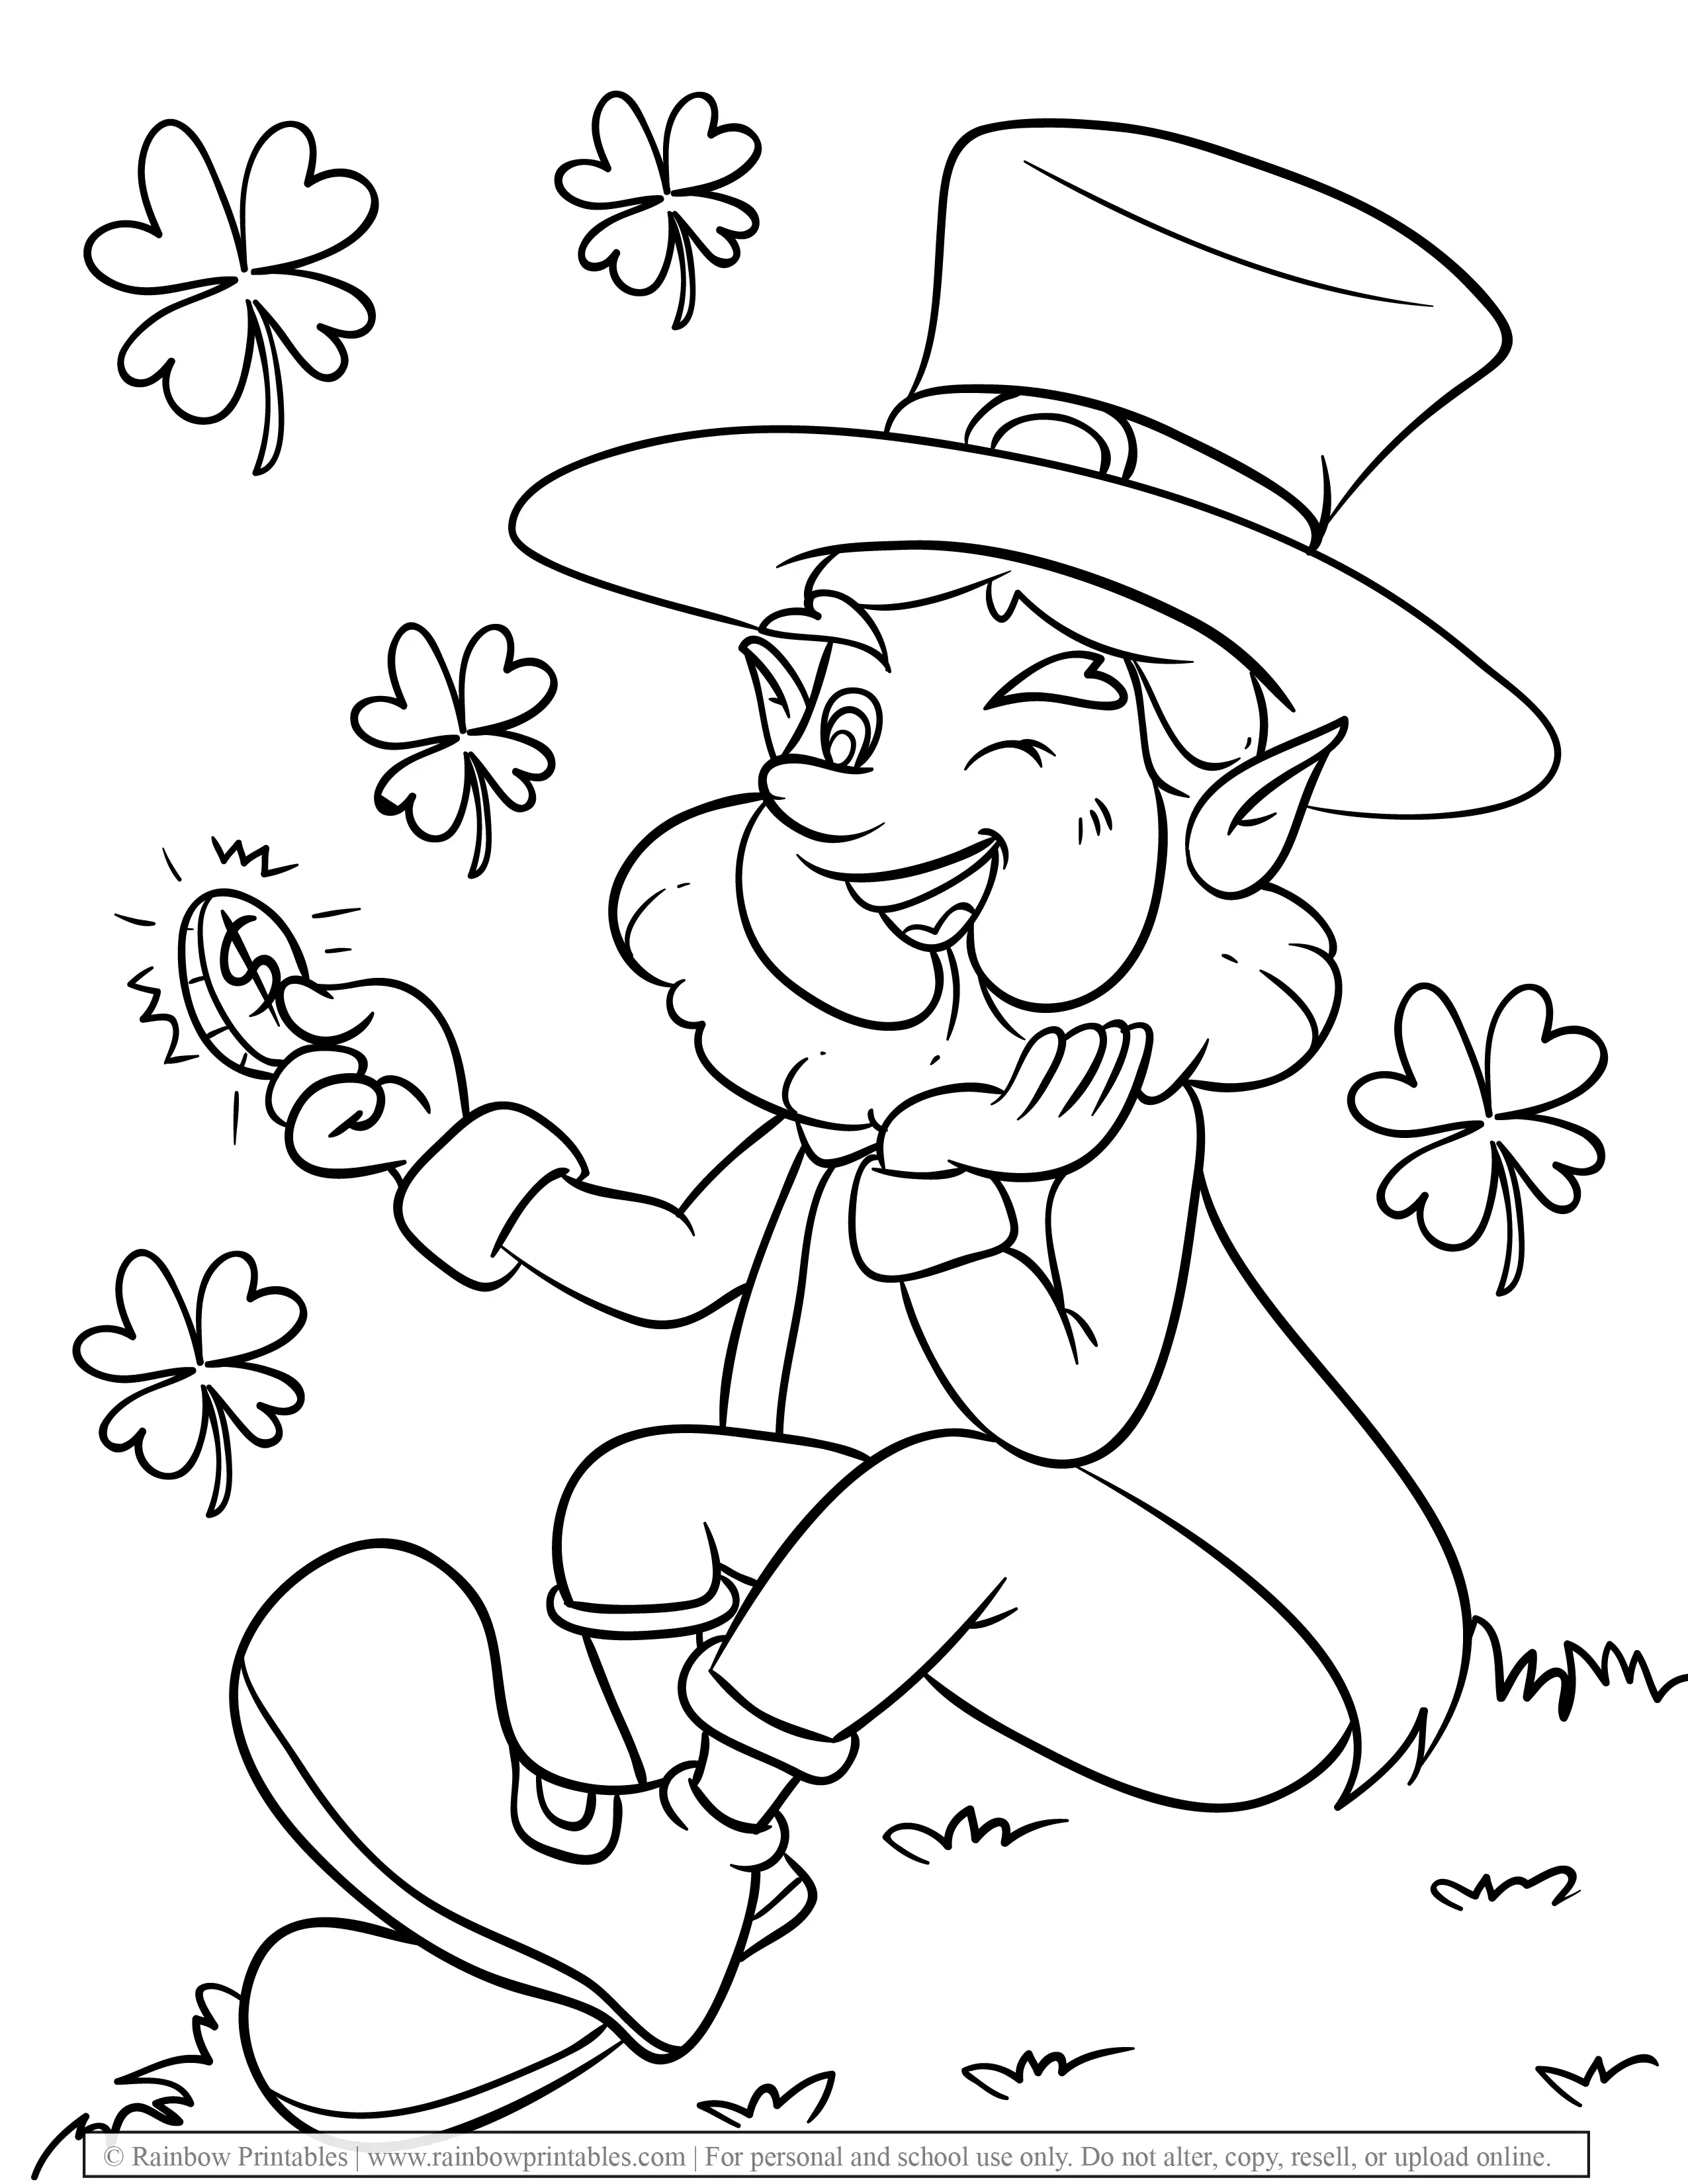 Free Coloring Pages for Kids Drawing Activities Line Art Illustration Leprechaun Pot of Gold Lucky 4 Clover Leaf St Patrick's Day Coin Winking